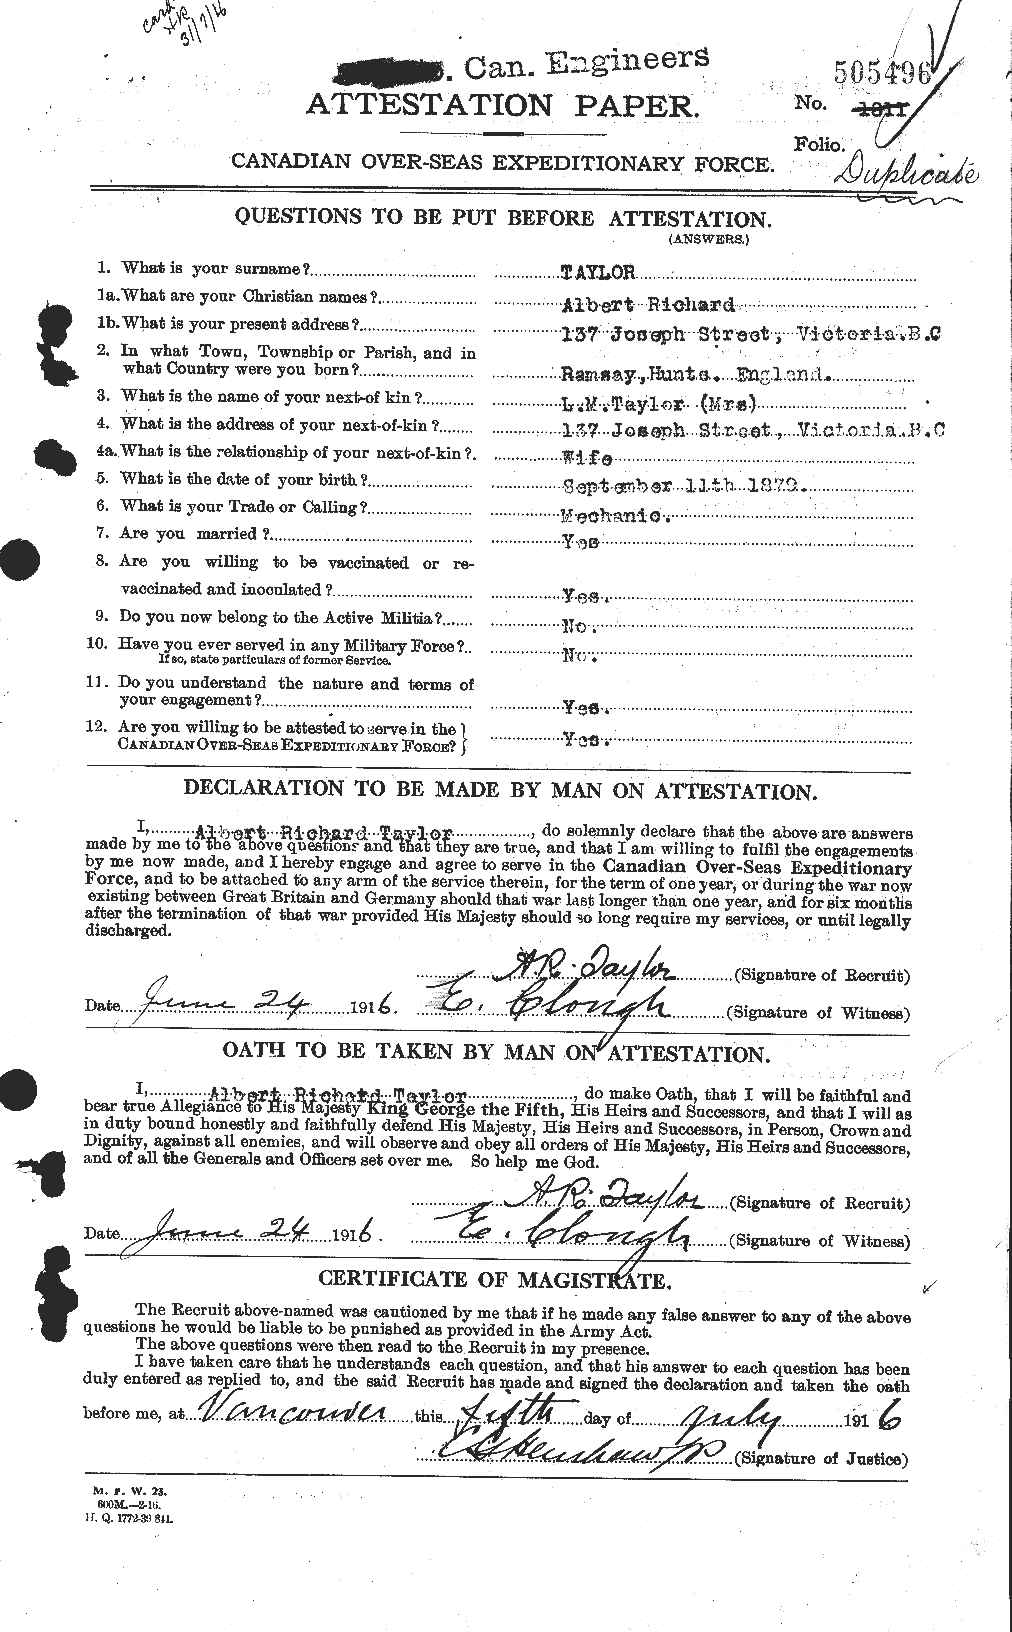 Personnel Records of the First World War - CEF 626124a